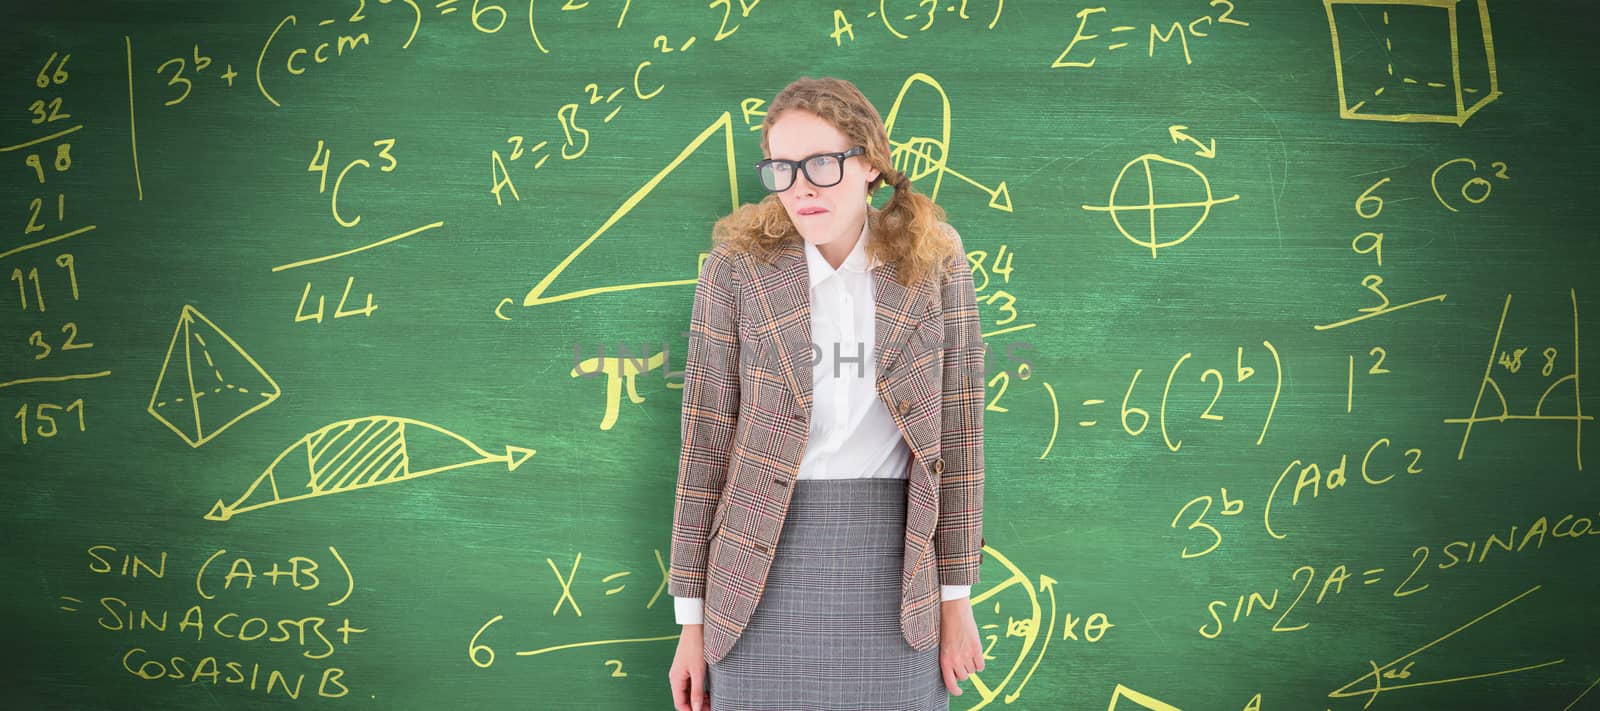 Geeky hipster woman looking nervous against green chalkboard